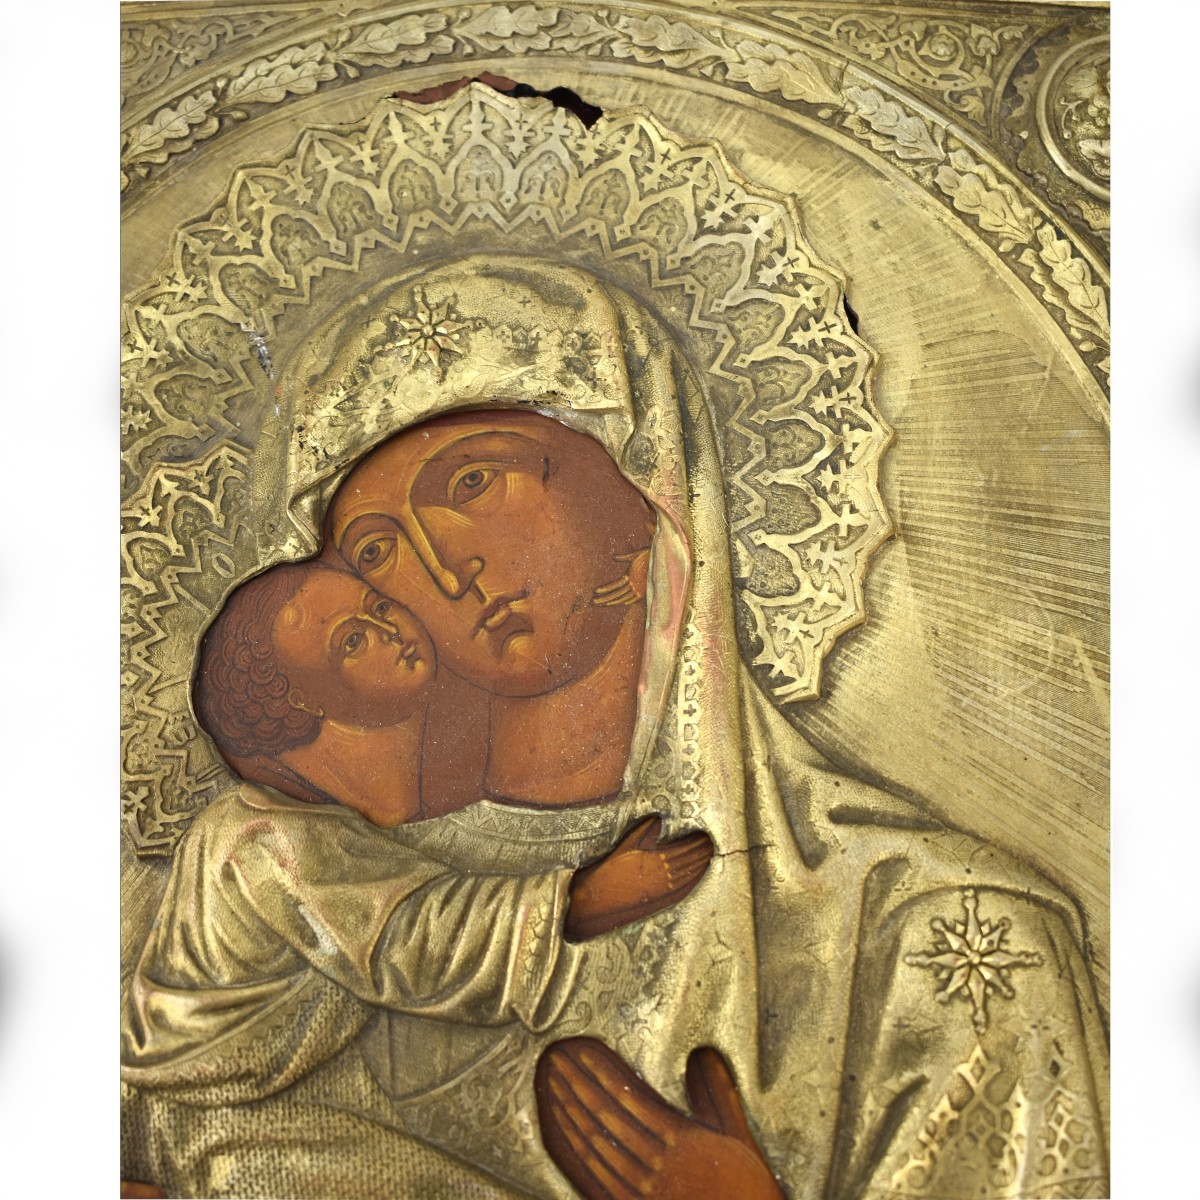 19/20th Century Russian Icon Depicting Madonna